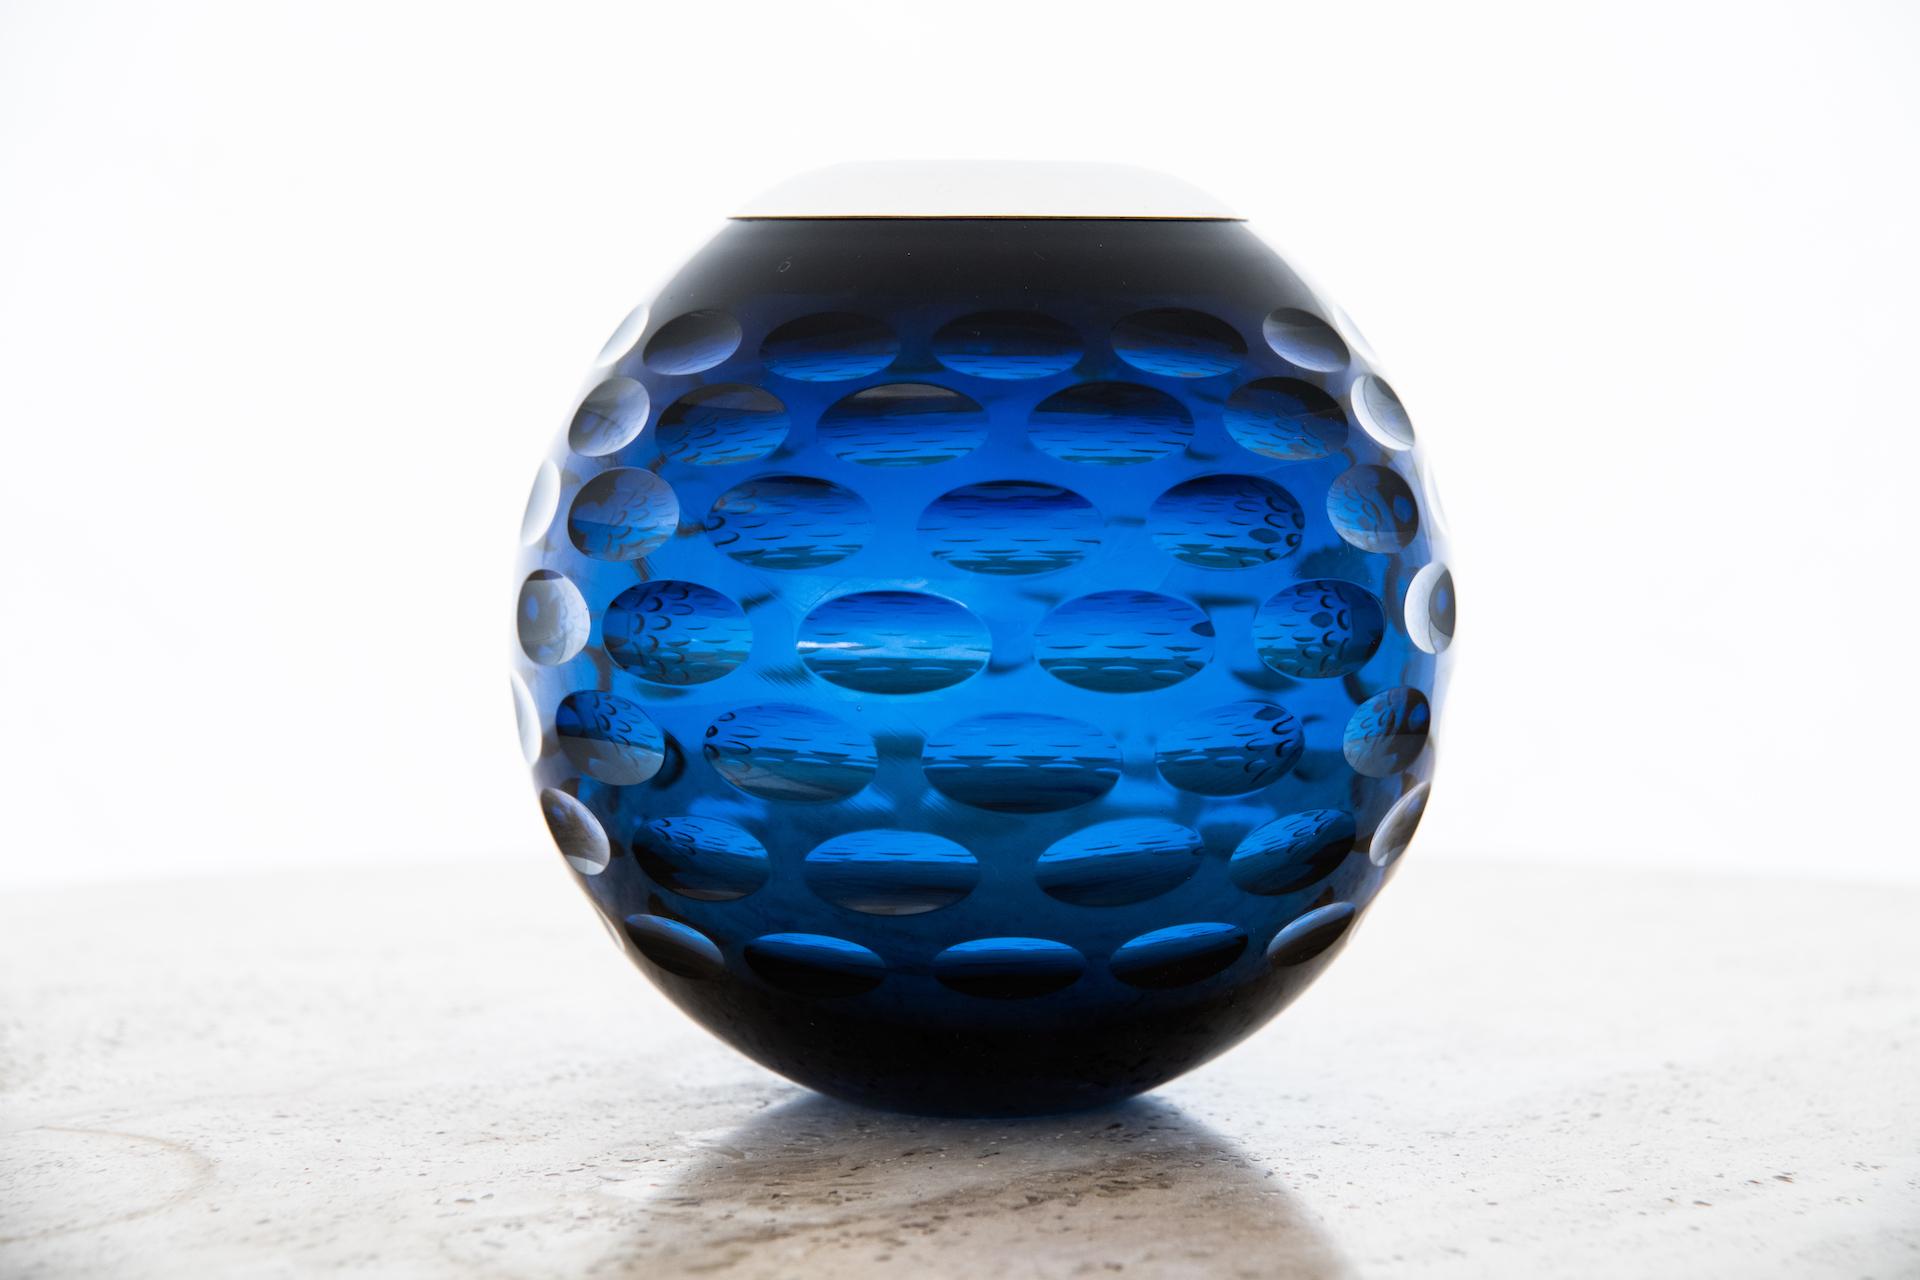 Large modern mouth-blown crystal match strike in deep blue color decorated with cut oval spheres. A single sphere on the strike is cut in a crosshatch pattern and etched to provide a friction spot on which to strike the match. The sterling silver